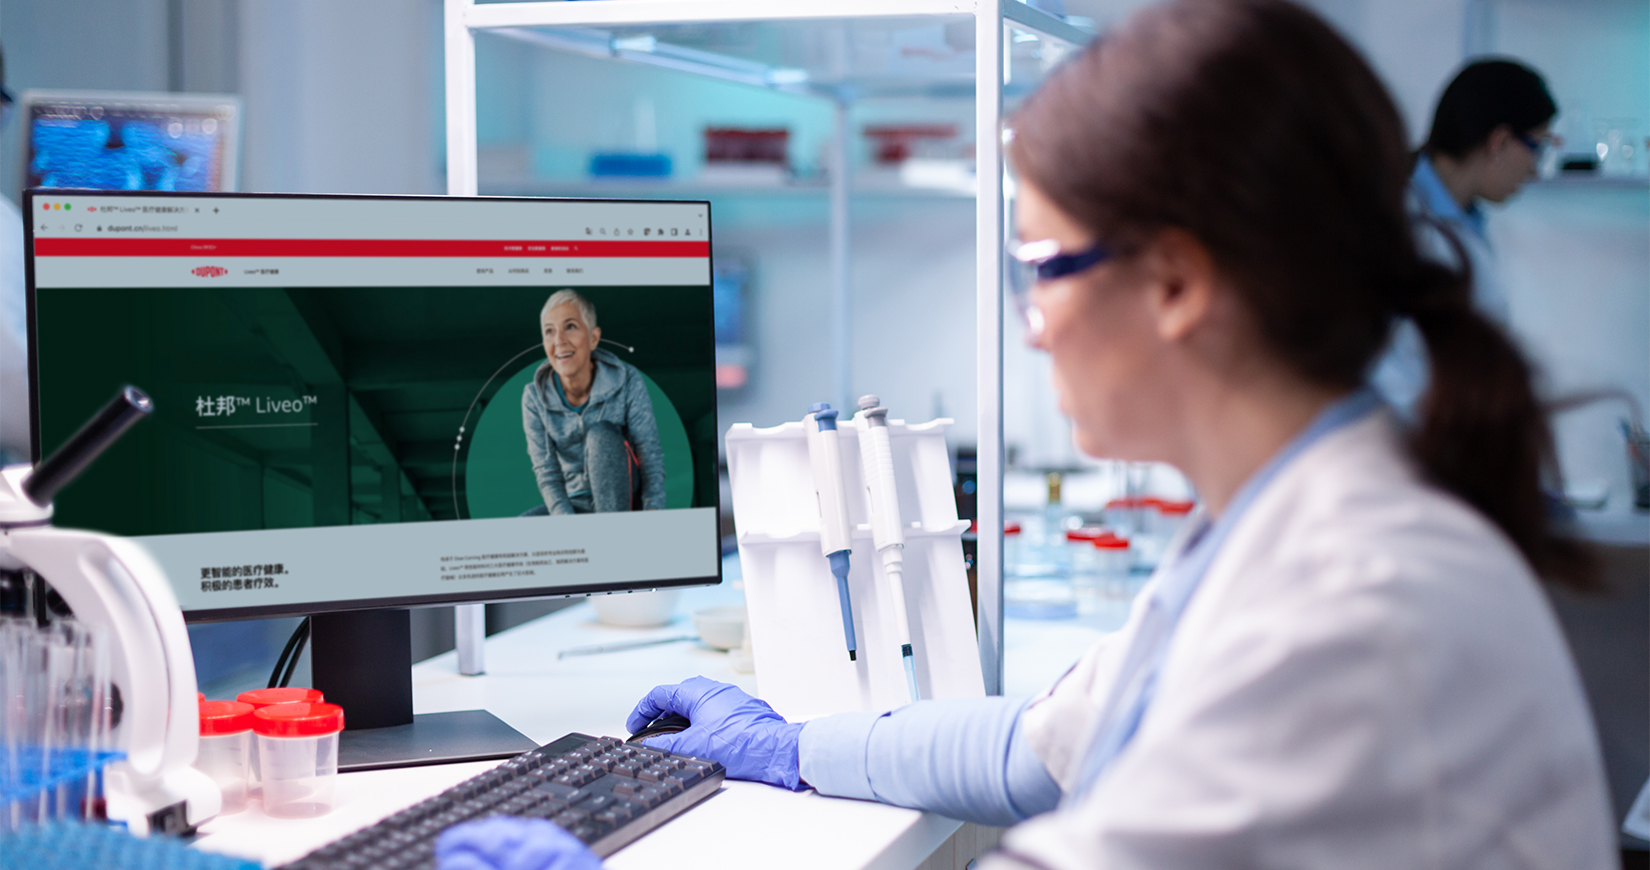 DuPont launches Chinese-language regional website for DuPont™ Liveo™ Healthcare Solutions brand